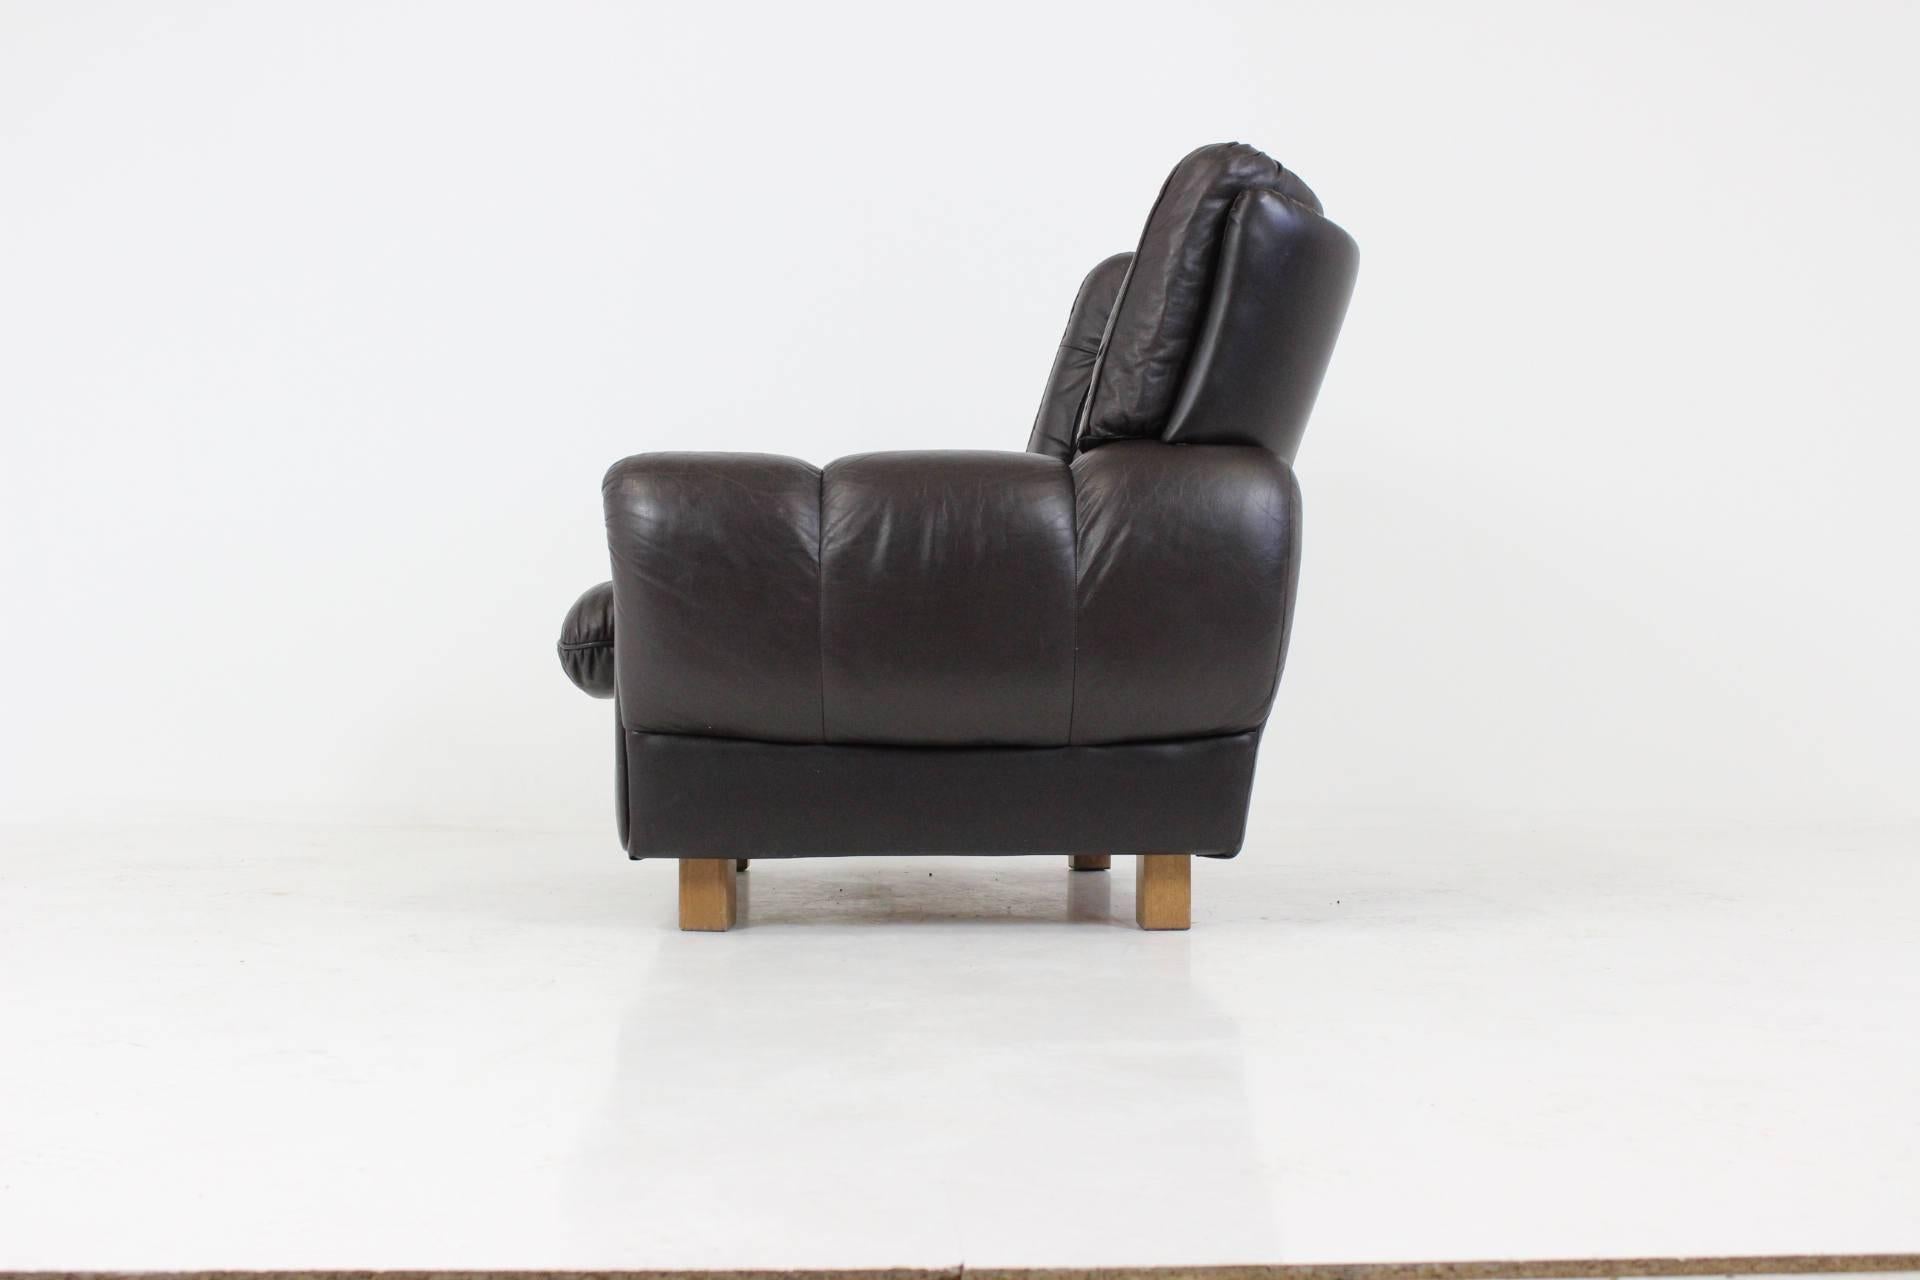 Leather brown armchair made in 1970ss in Czechoslovakia. Very comfortable, signed by marker, good, original condition. Height of seat is 40cm.